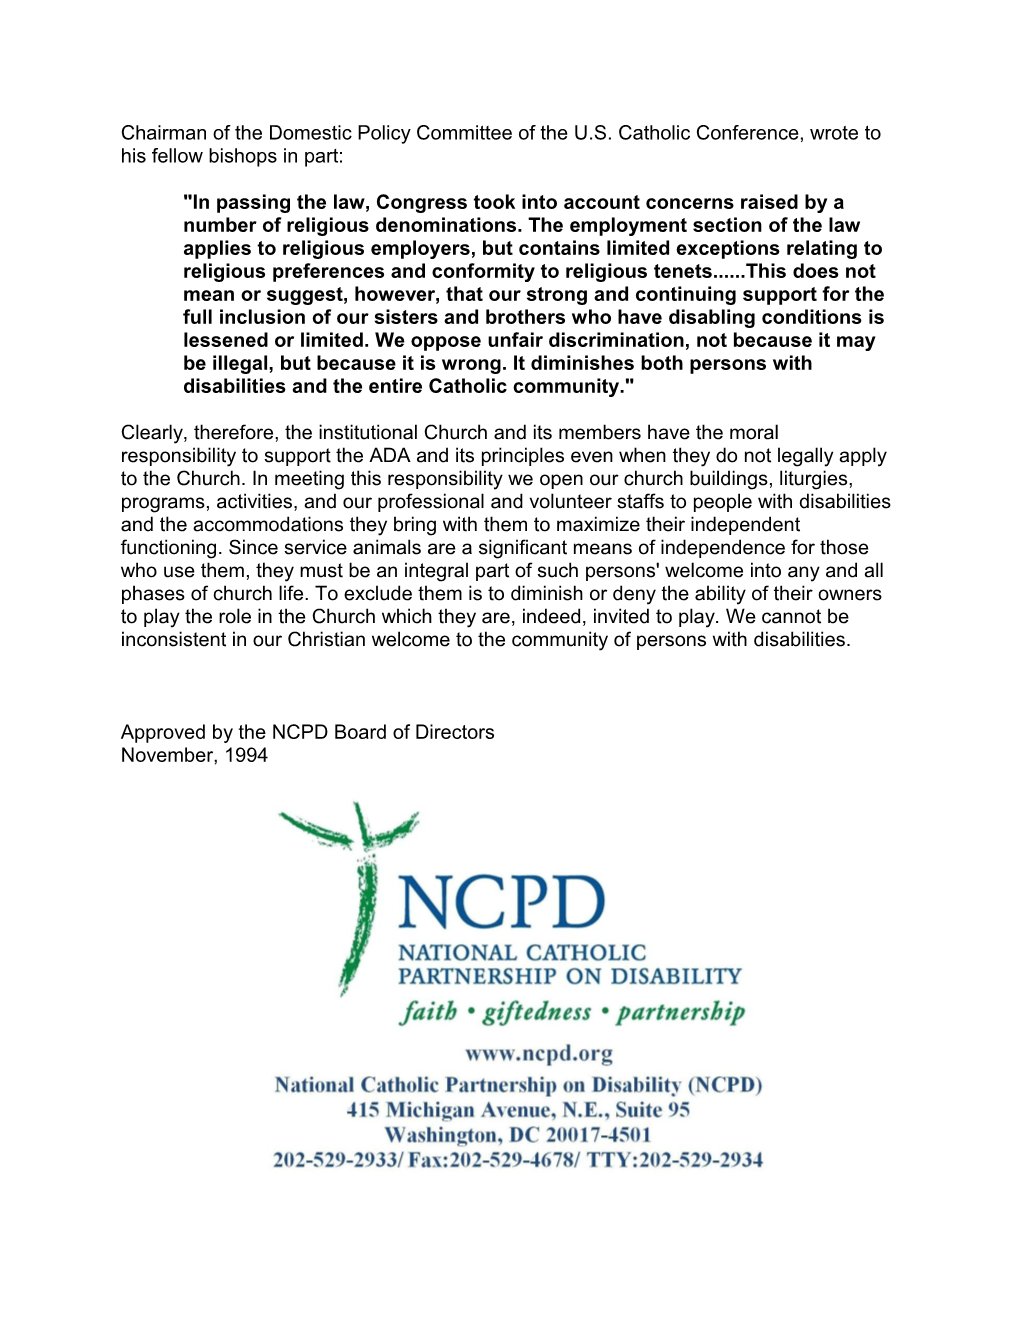 NCPD Board: Guidelines for the Admission of Service Animals to Church Facilities, Programs